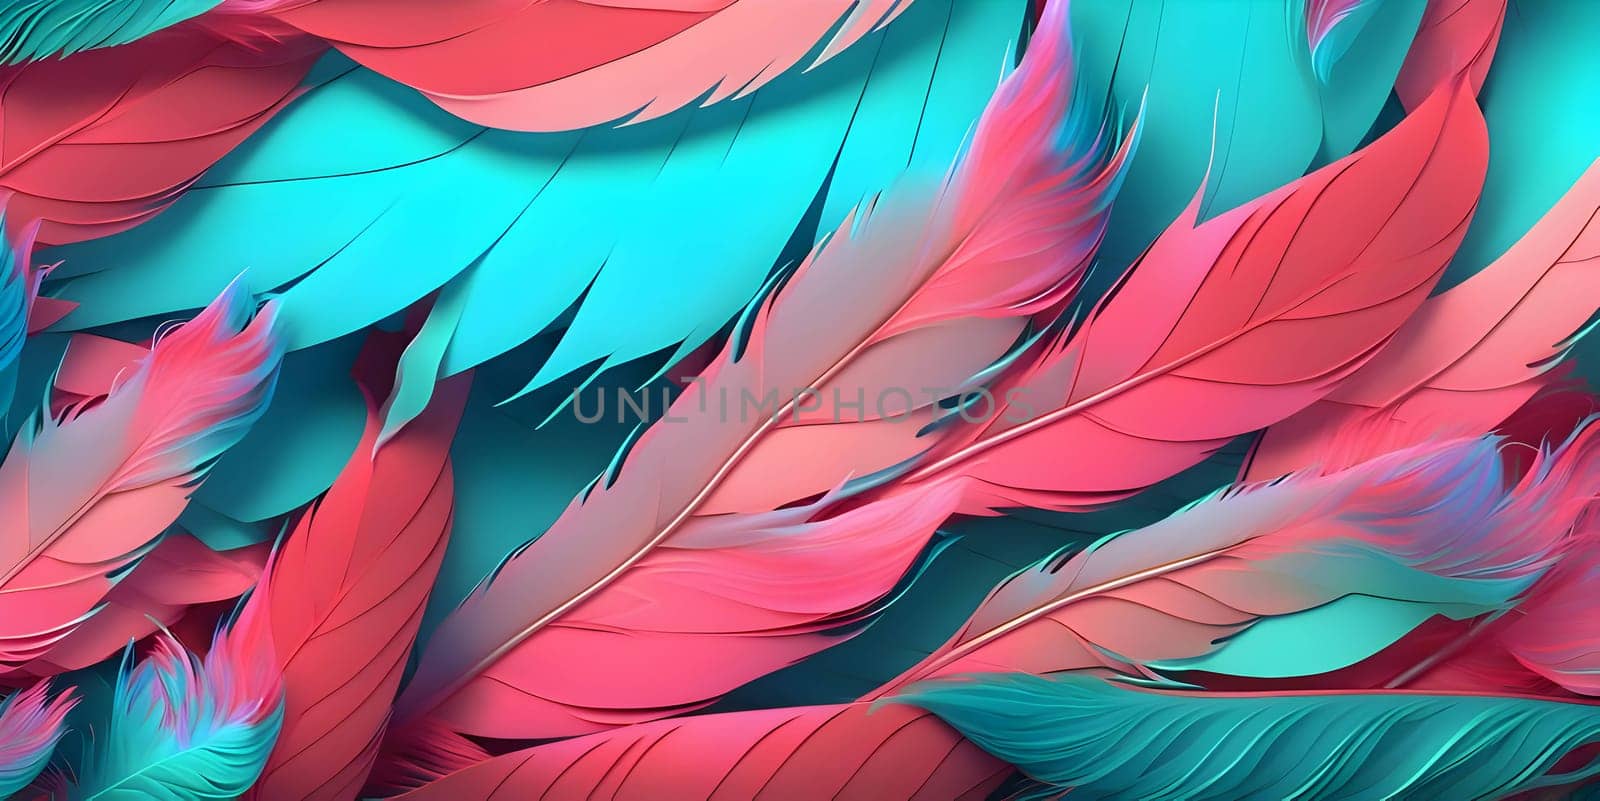 An abstract background wallpaper adorned with a burst of colorful and vibrant bird feathers, adding a visually captivating touch.